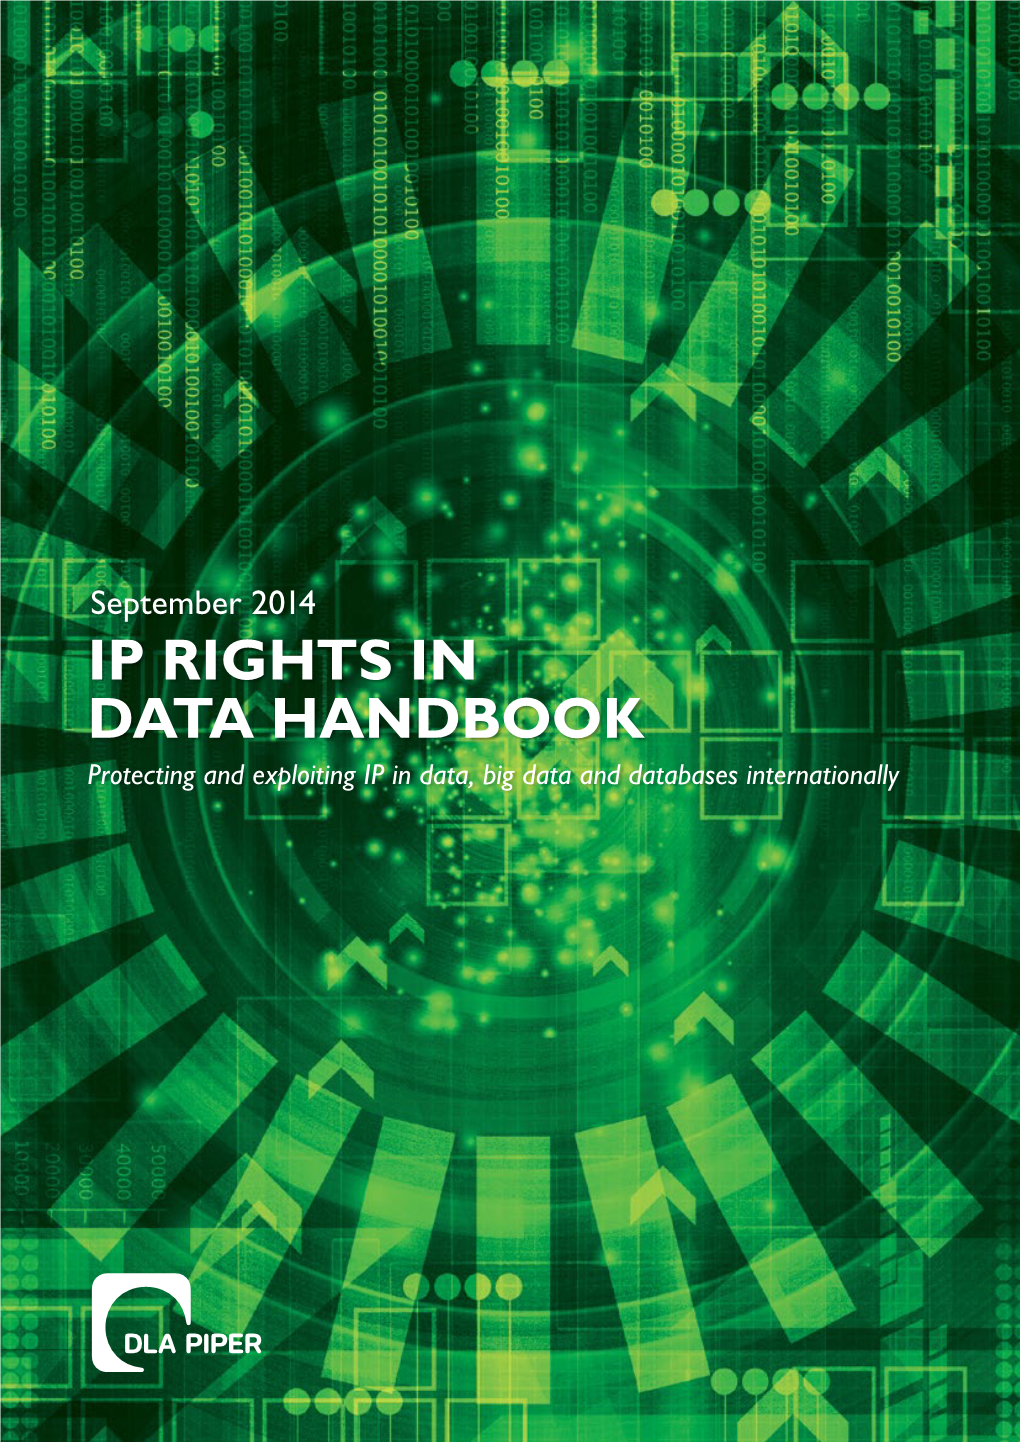 September 2014 IP RIGHTS in DATA HANDBOOK Protecting and Exploiting IP in Data, Big Data and Databases Internationally IP RIGHTS in DATA HANDBOOK